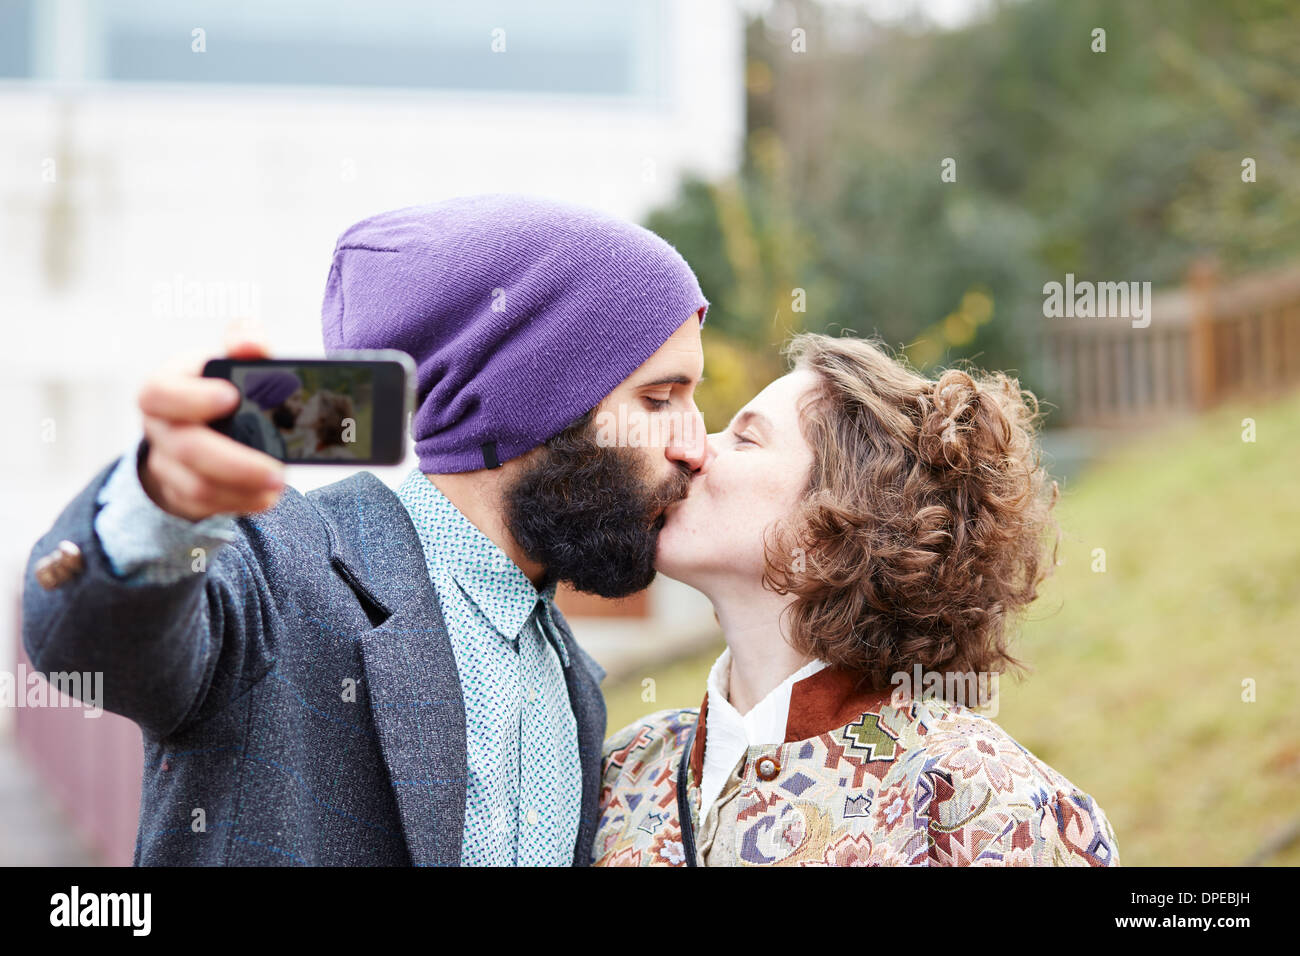 Couple taking a photograph of themselves kissing with a smartphone outdoors Stock Photo